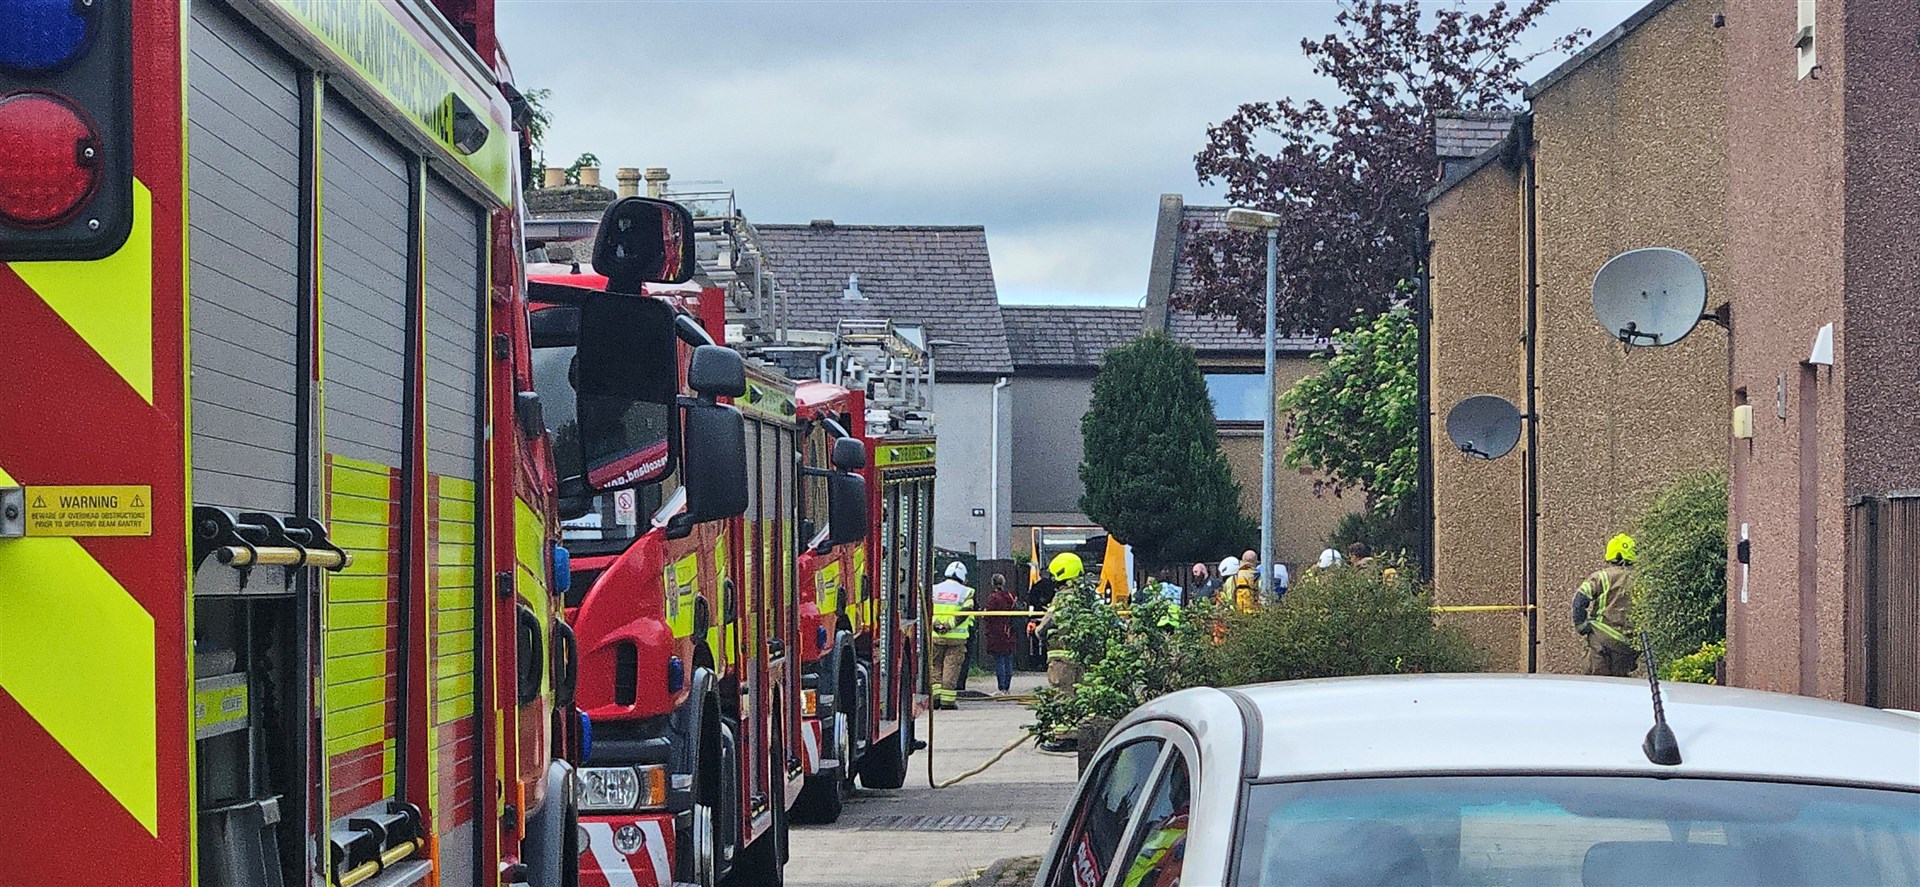 The Scottish Fire and Rescue Service said it had sent three appliances to the scene, which can be seen here in Muirtown Street.